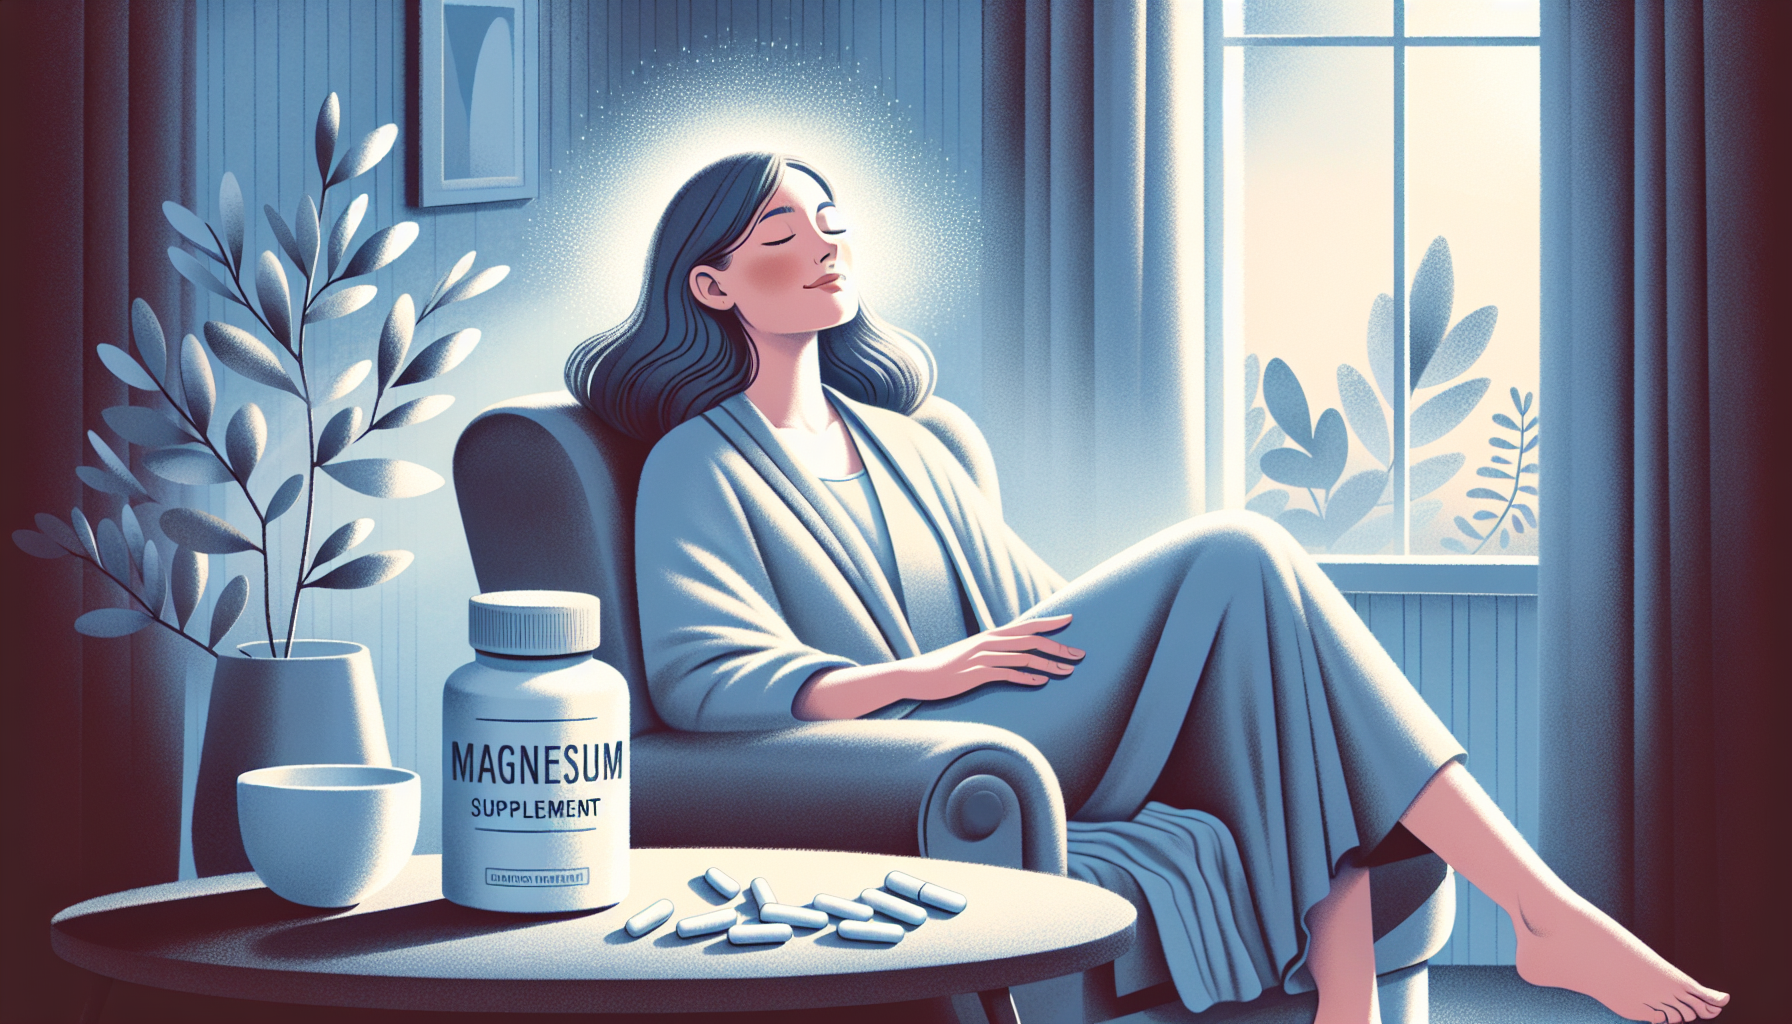 Illustration of a woman feeling relieved and relaxed after taking magnesium supplements